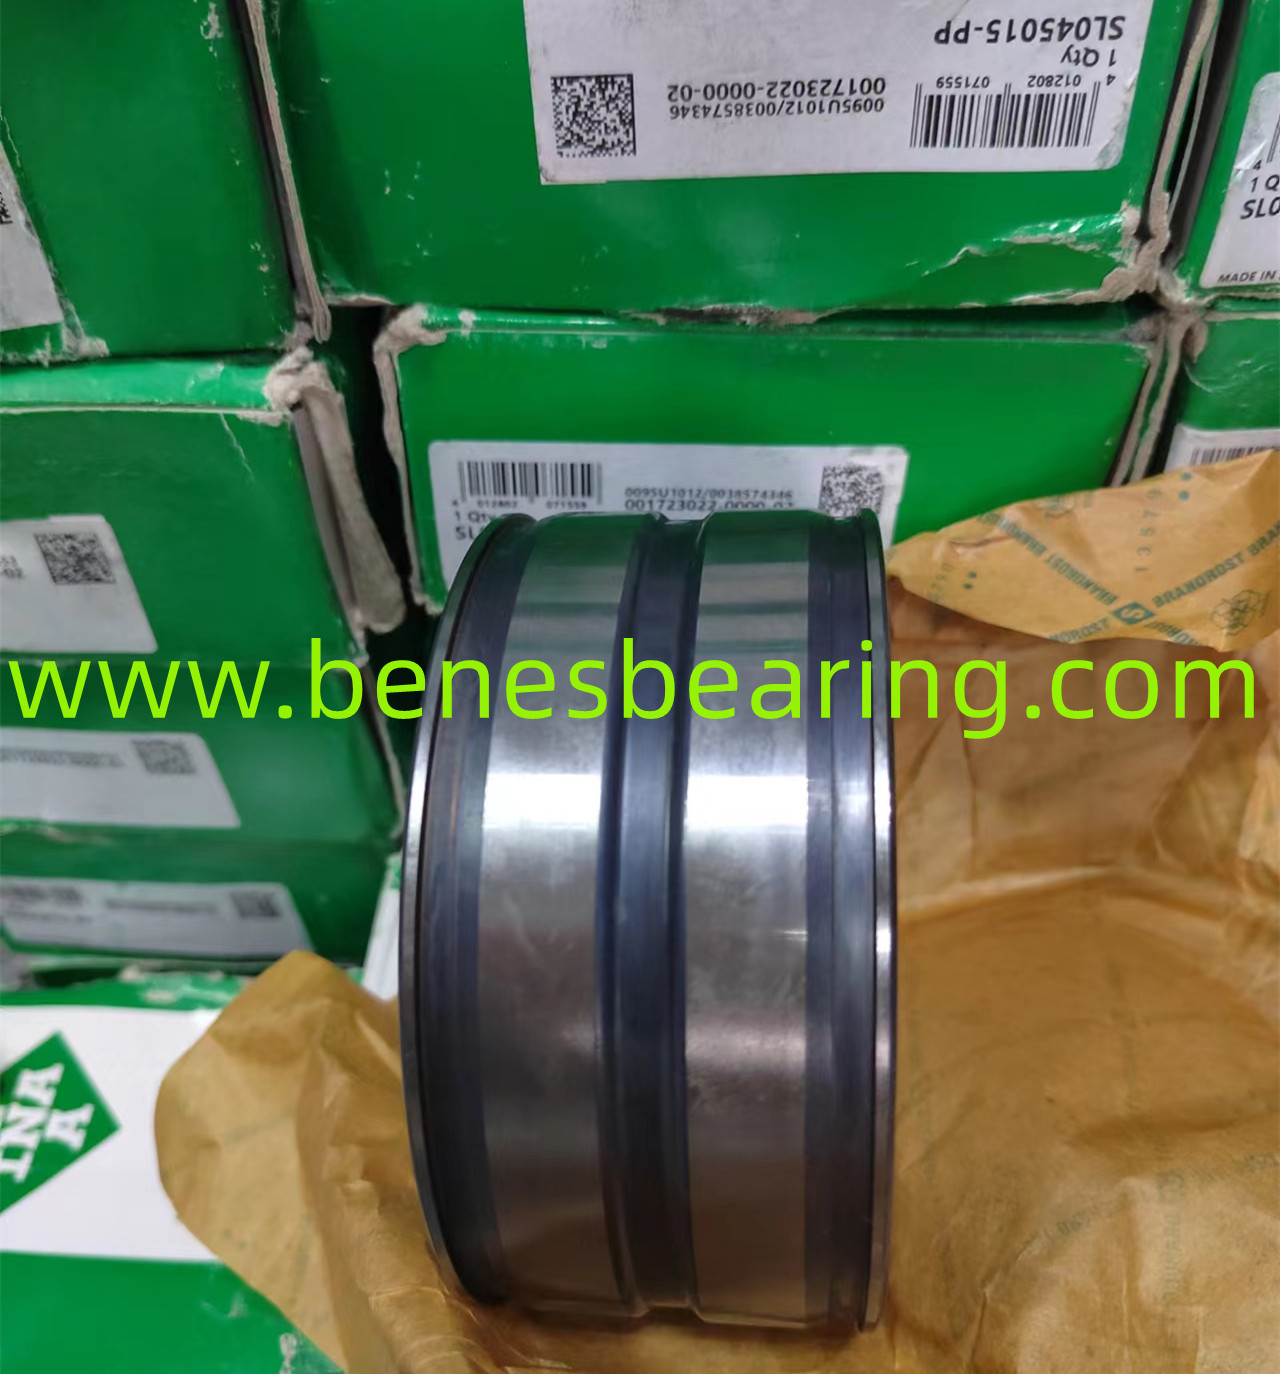 SL045015-PP Cylindrical roller bearings locating bearing, double row, full complement cylindrical roller set, dimension series 50, lip seals on both sides  d 75 mm D 115 mm B 54 mm